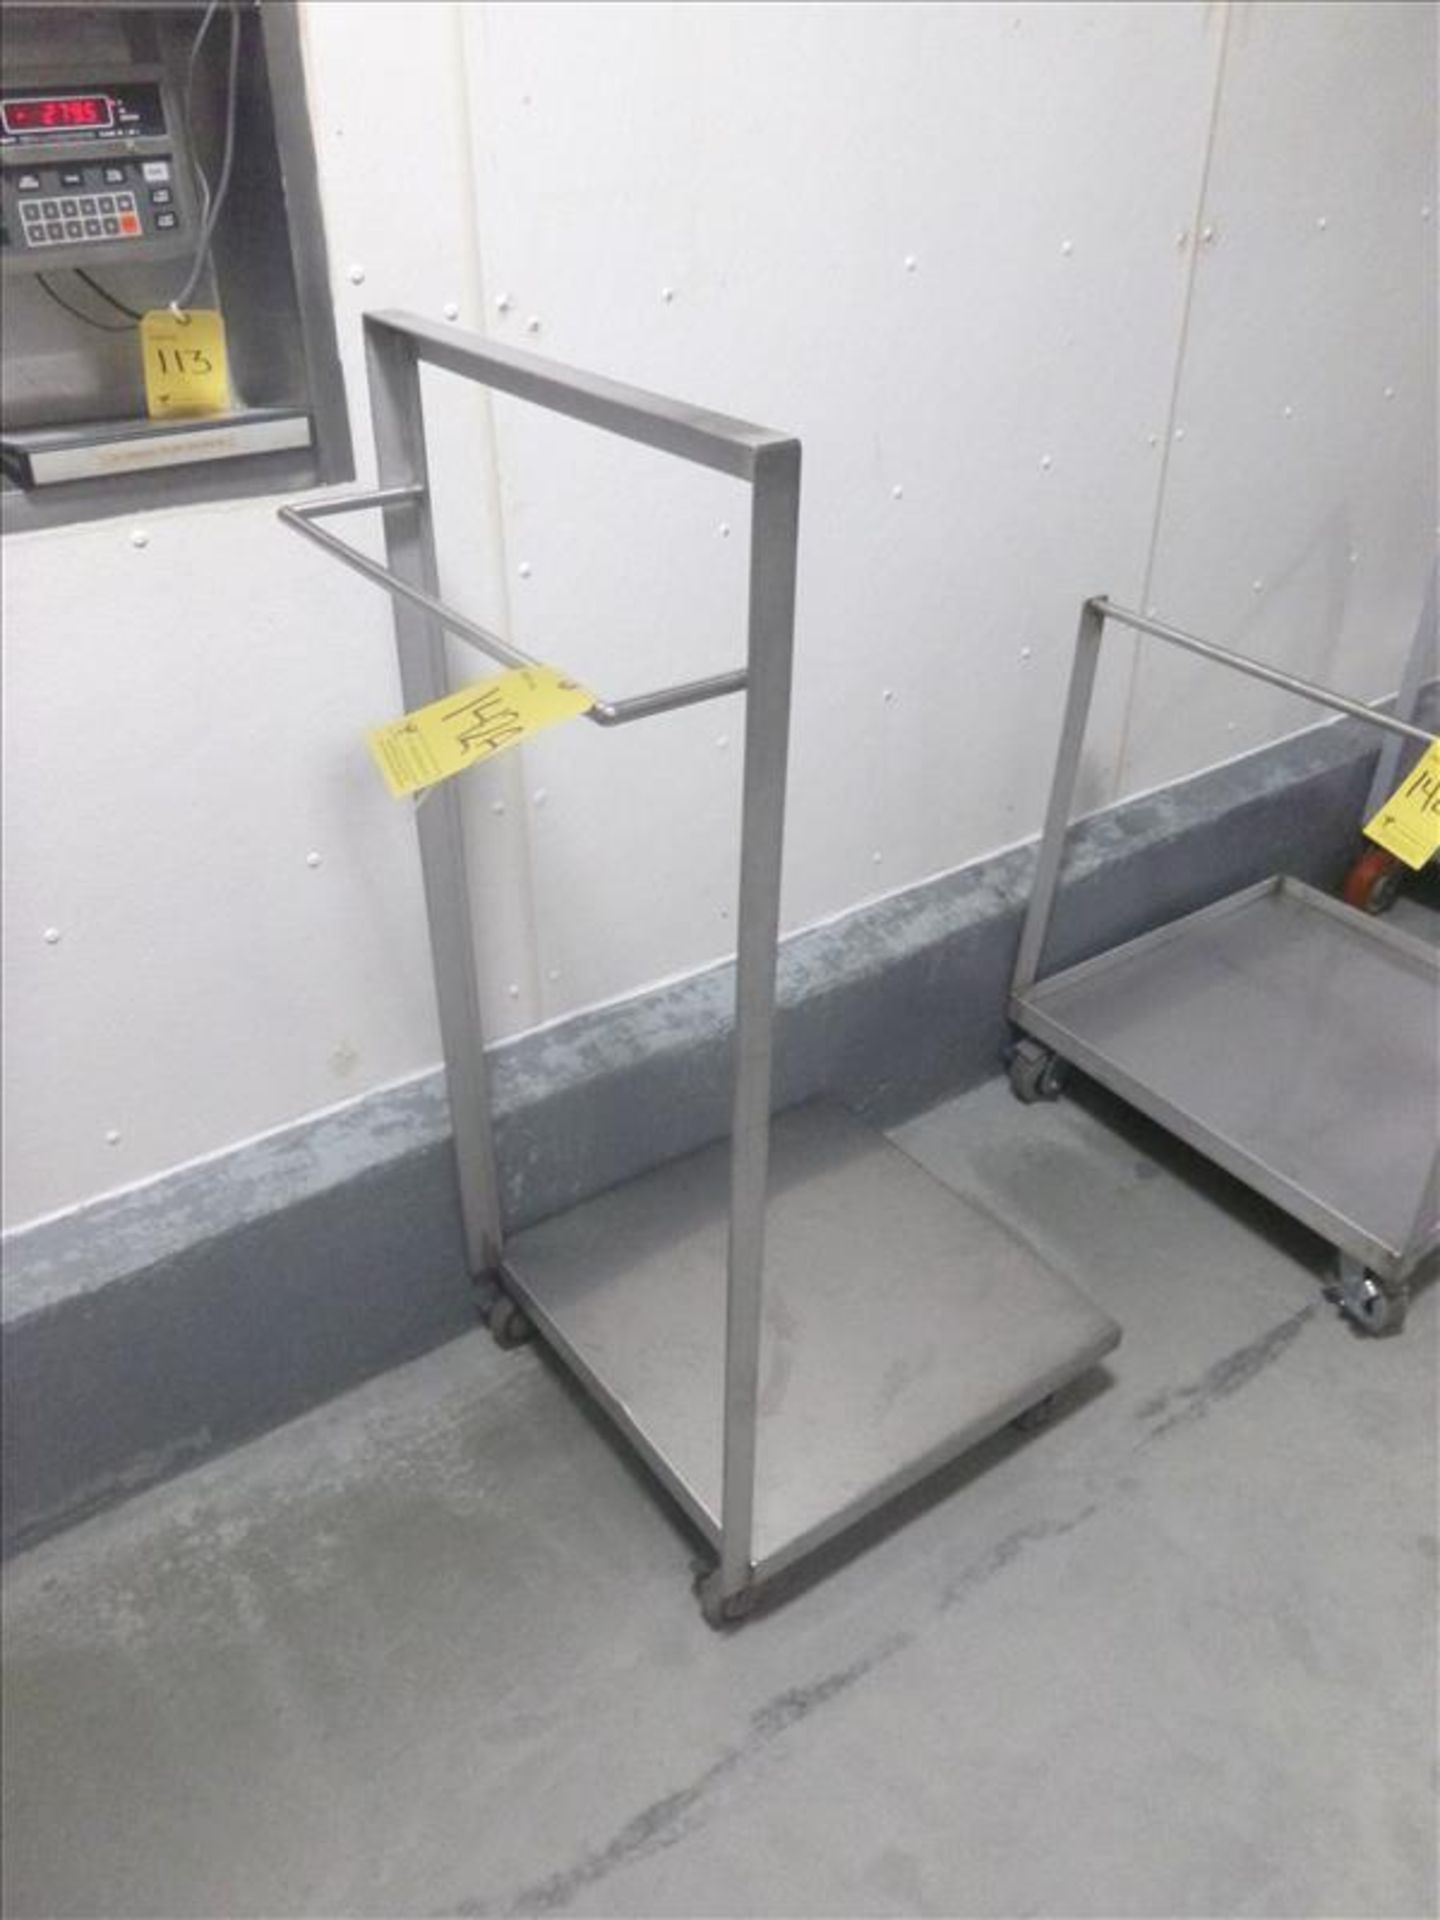 stainless steel platform cart 24 in. x 24 in. (Located at 140 Panet Road, Winnipeg, MA)